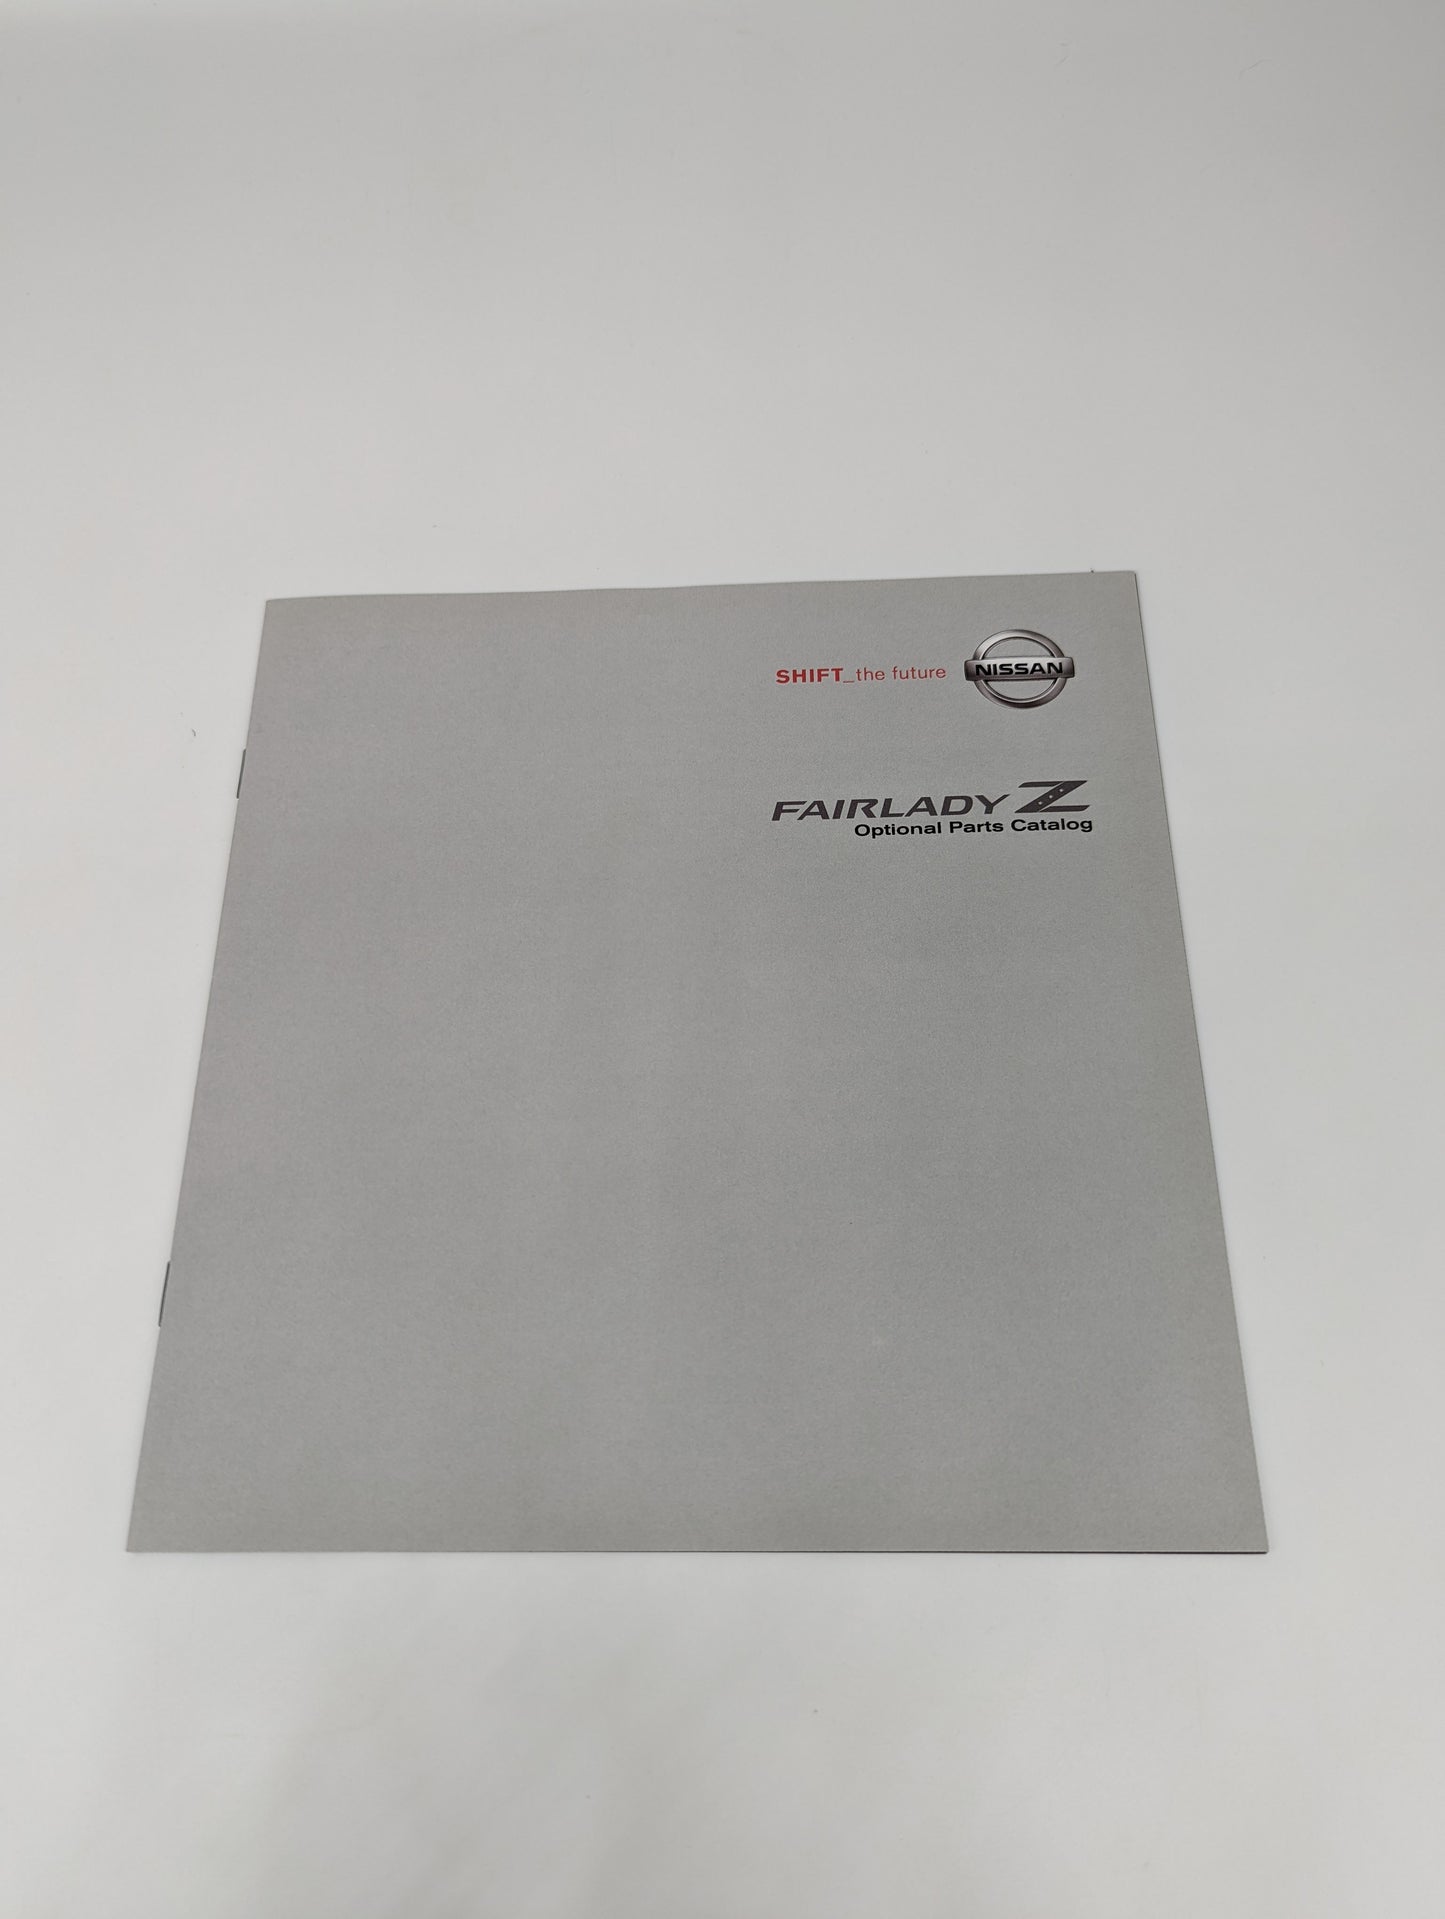 350z Japanese dealership book/point of sale